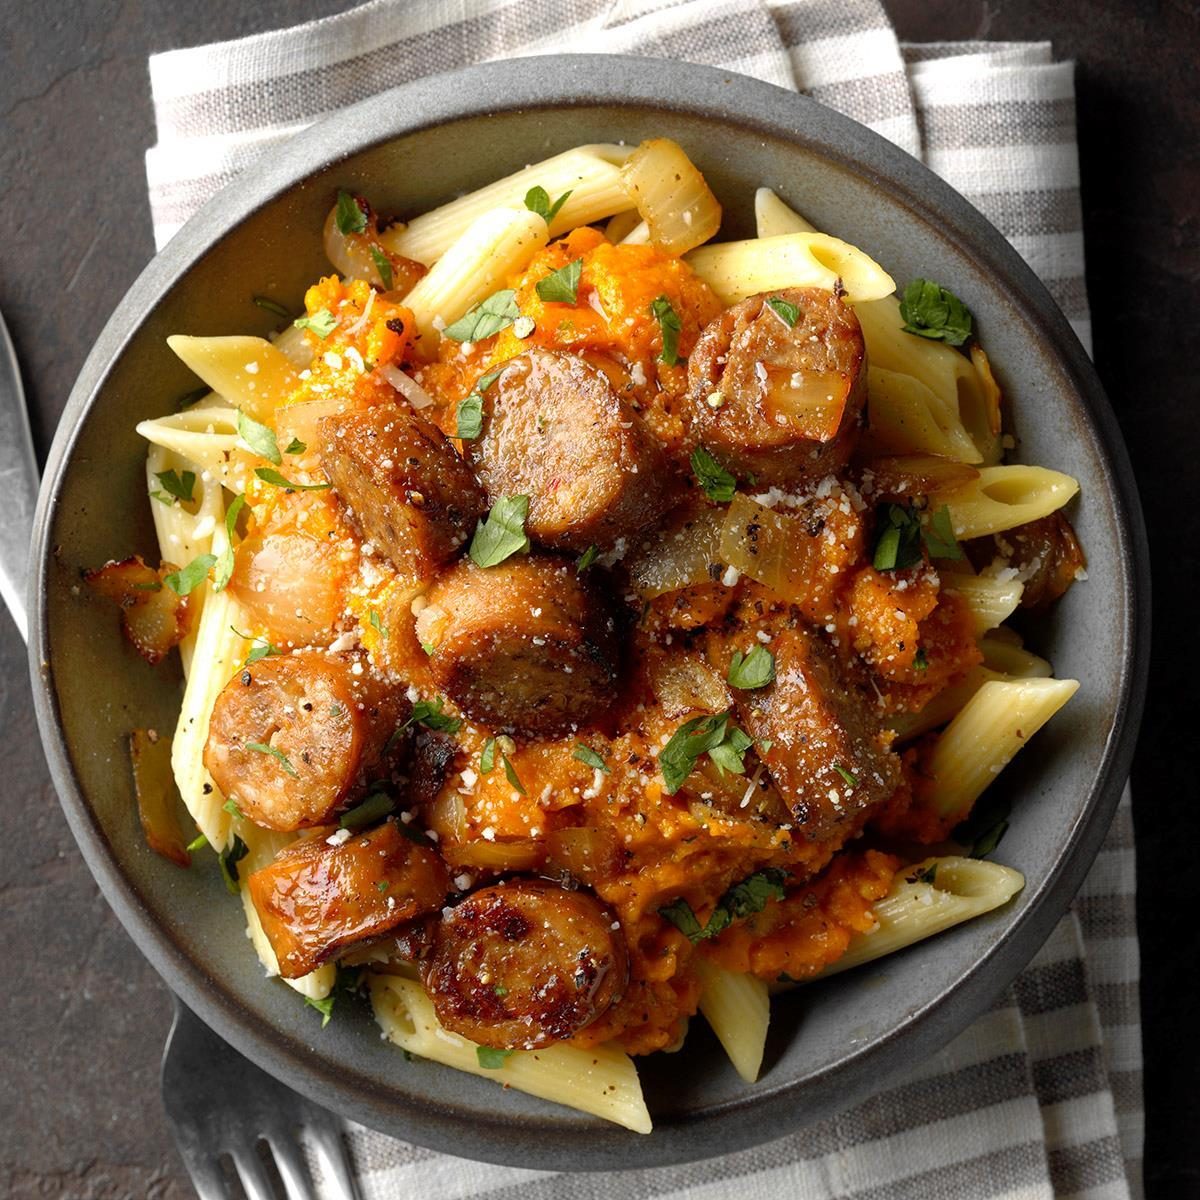 Day 1: Sausage and Squash Penne